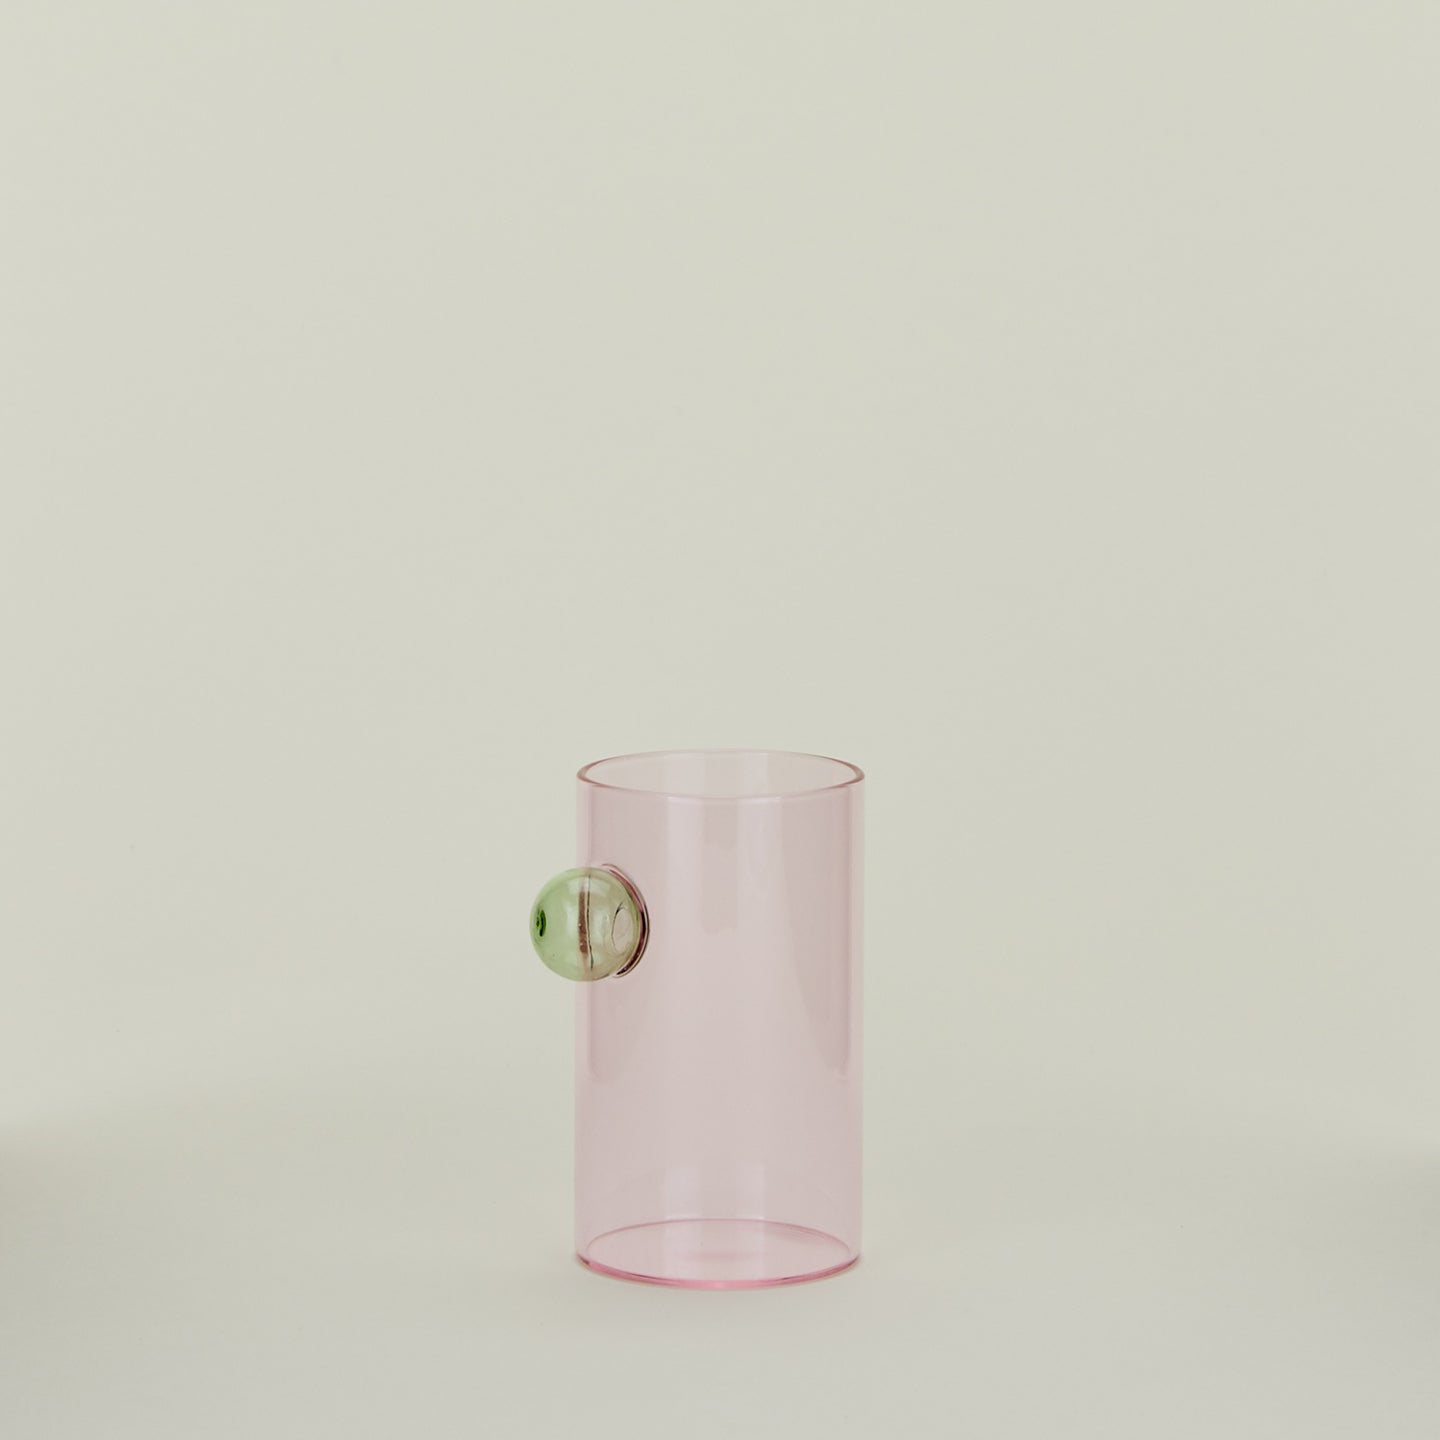 Blush glass with green bubble decoration.